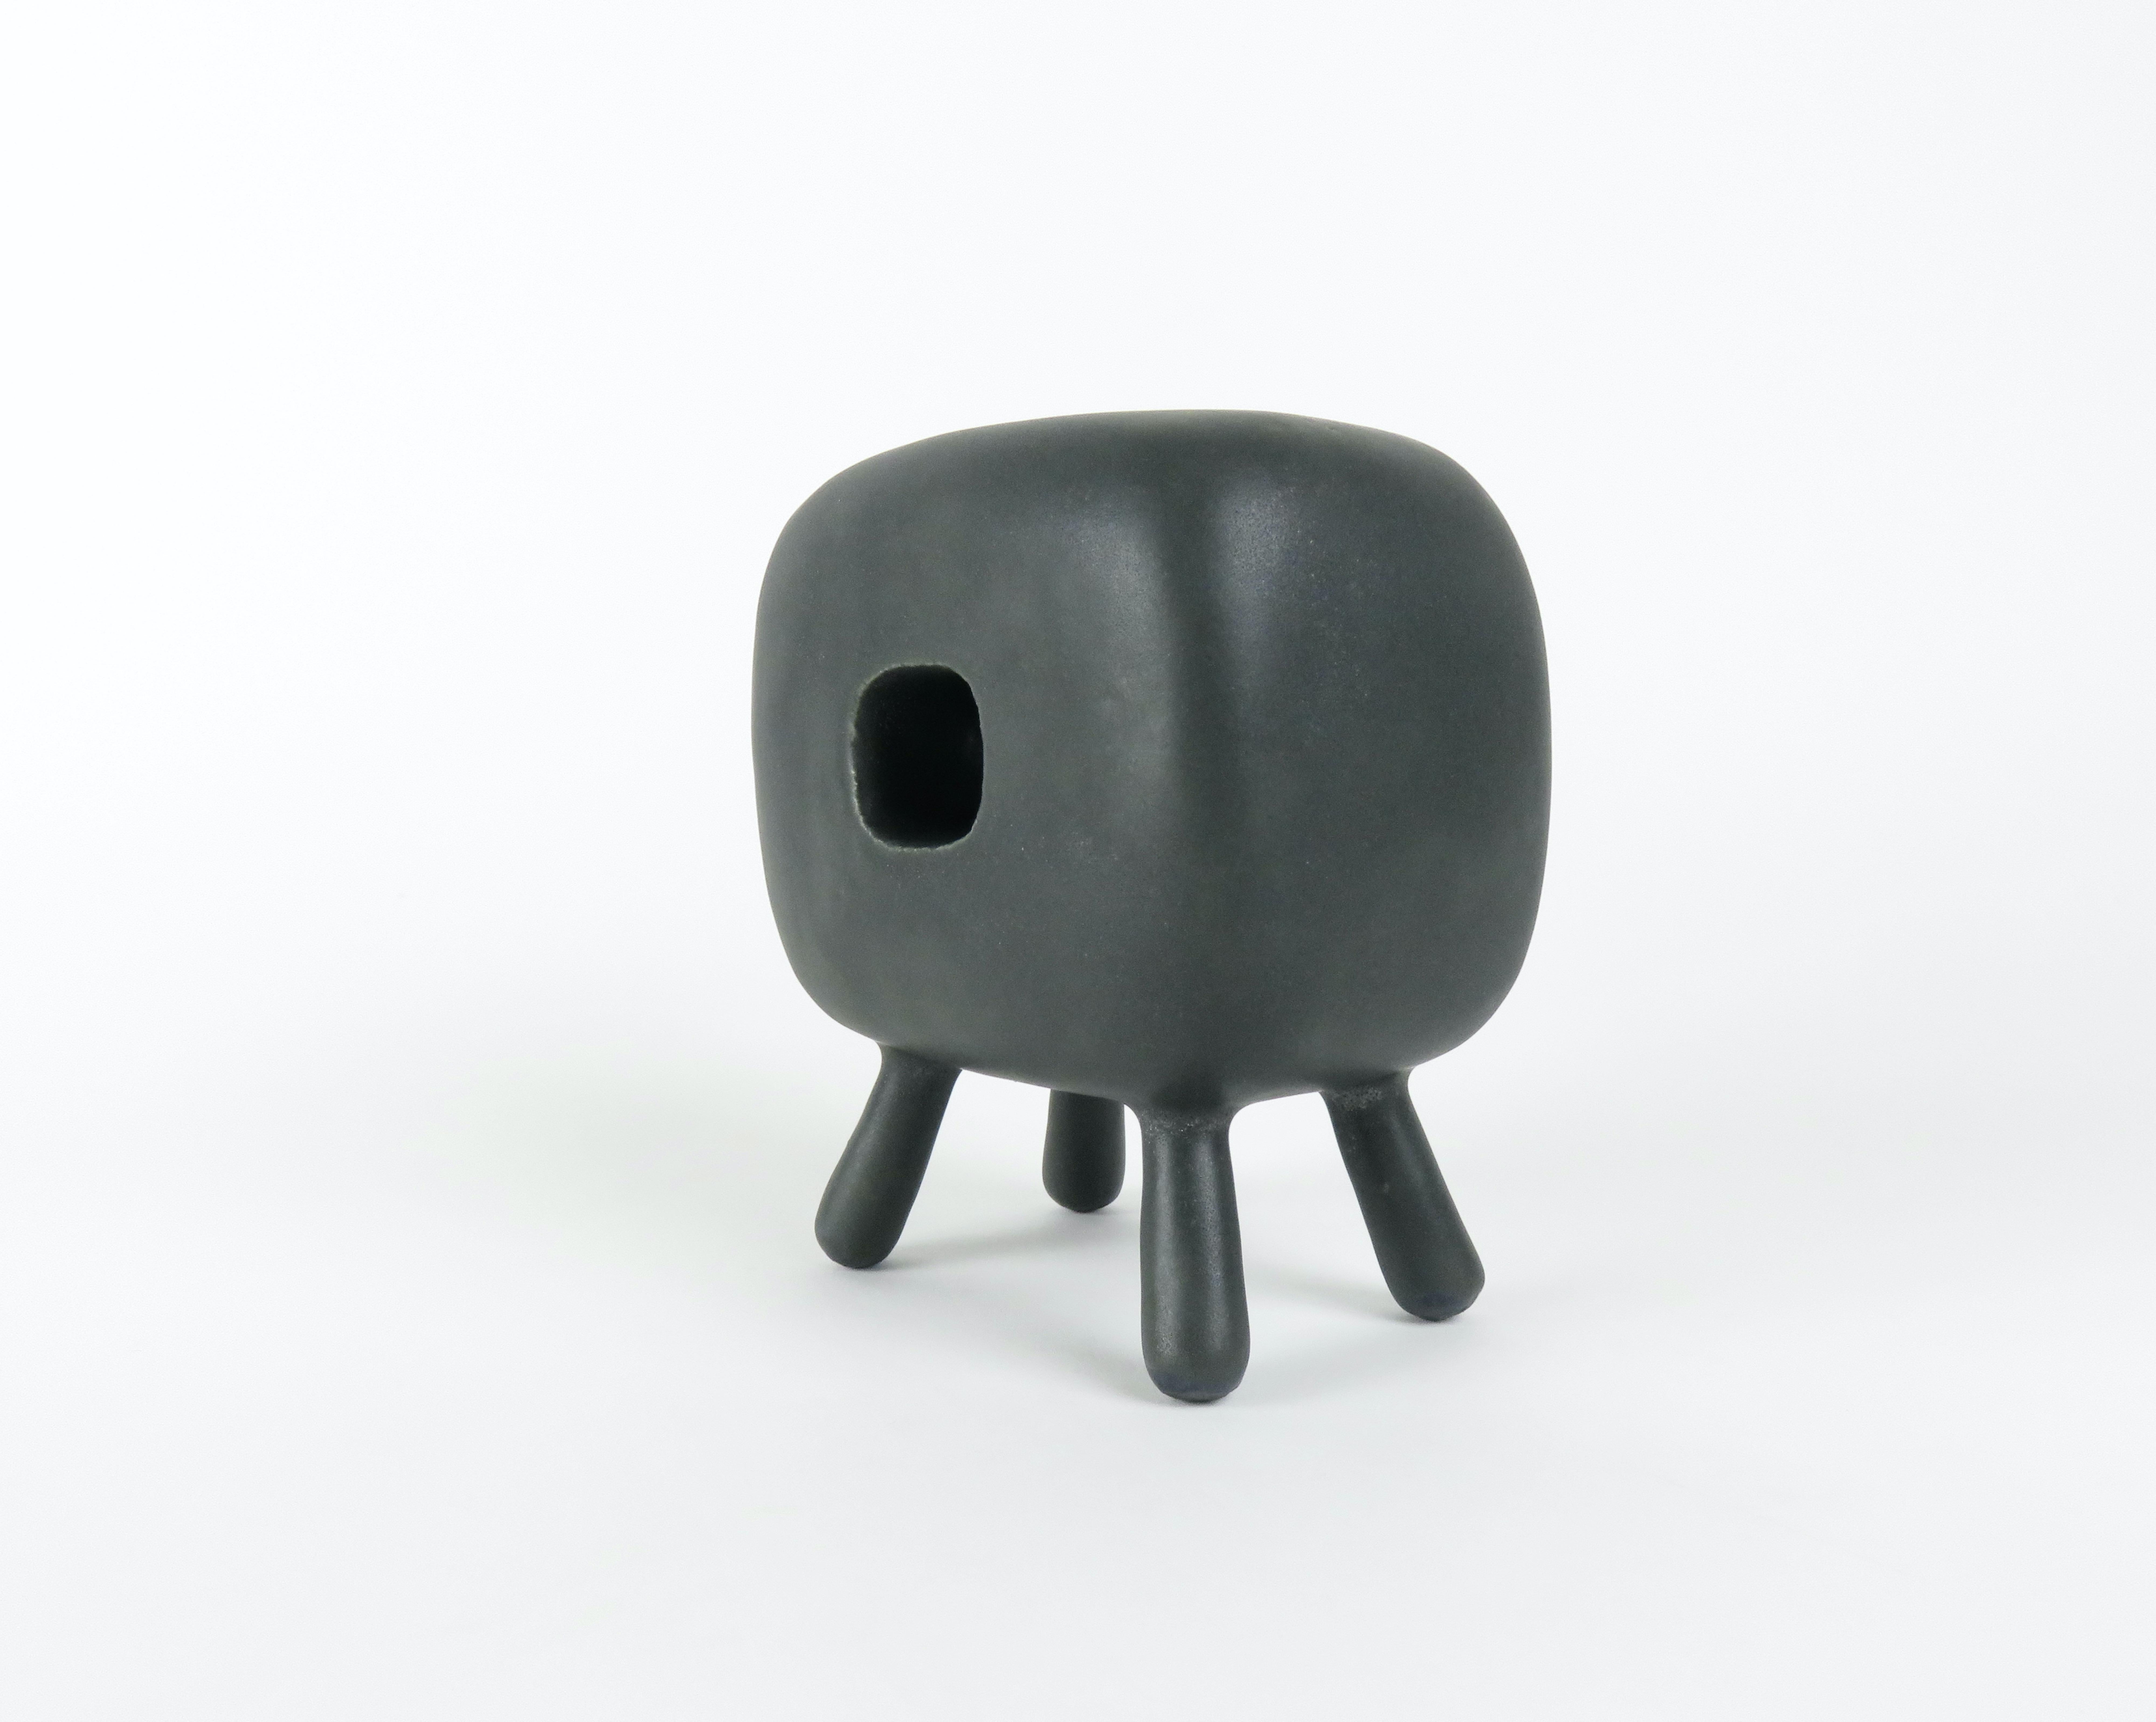 This small hand built rectangular ceramic sculpture with square opening on 4 Legs is part of the Artist's ongoing series of Modern Totems. Starting with a dark brown clay body, the piece is glazed in a creamy thick matte black. The small cube on